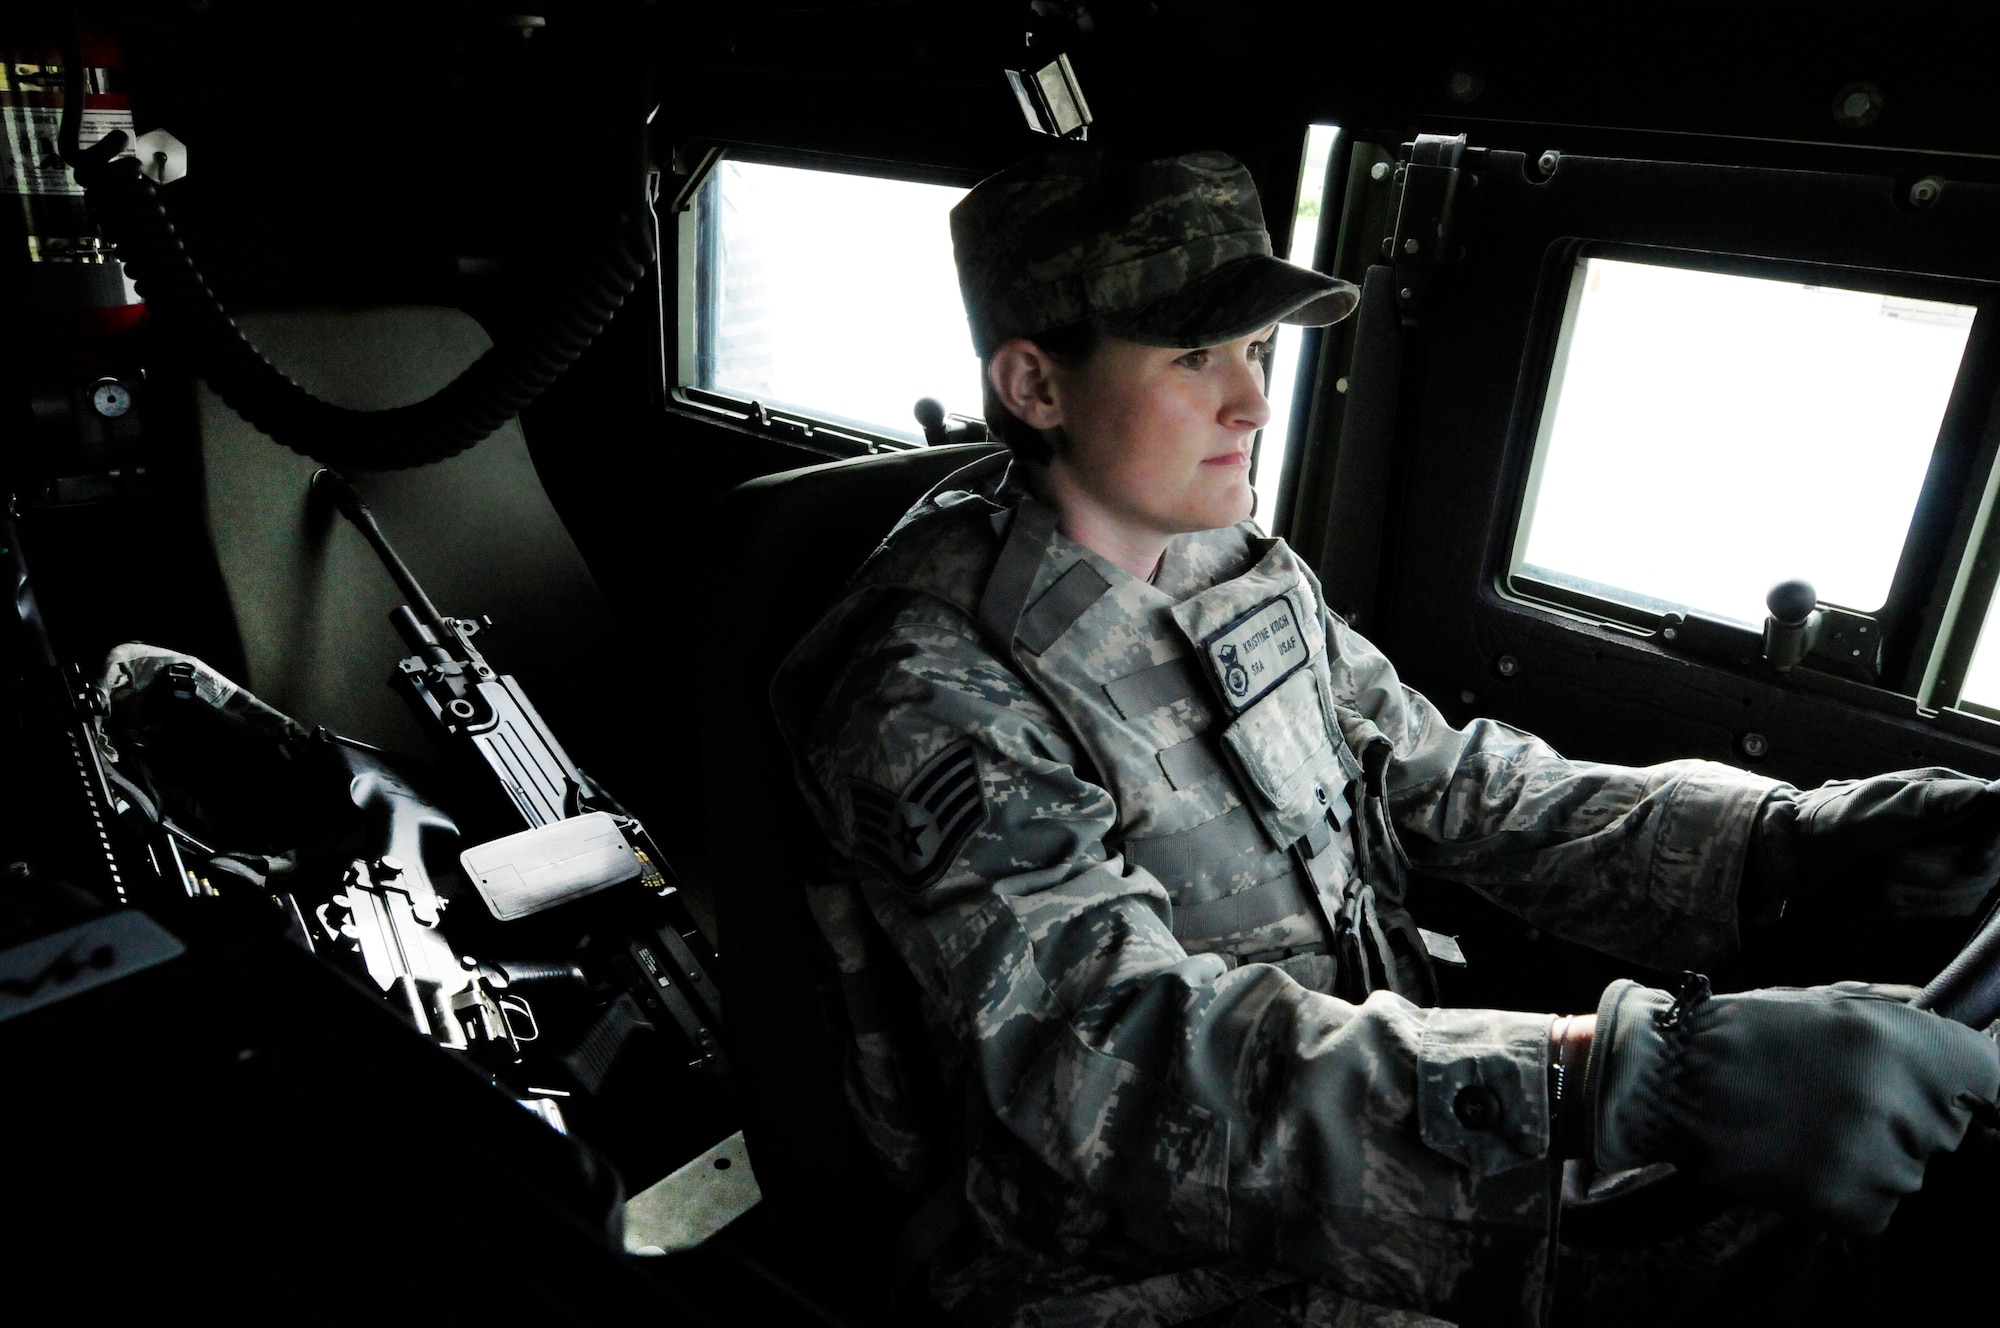 Newly promoted U.S. Air Force Staff Sgt. Kristine Koch, 145th Security Forces Squadron, starts an armored Humvee for patrol during a training exercise held in the Uwharrie National Forest, Troy, N.C., April 2, 2015. Koch, who completed her first Professional Military Education milestone, Feb 12, 2015, as a distinguished graduate from Airman Leadership School has been with 145th SFS since Oct 2012. (U.S. Air National Guard photo by Master Sgt. Patricia F. Moran, 145th Public Affairs/Released)